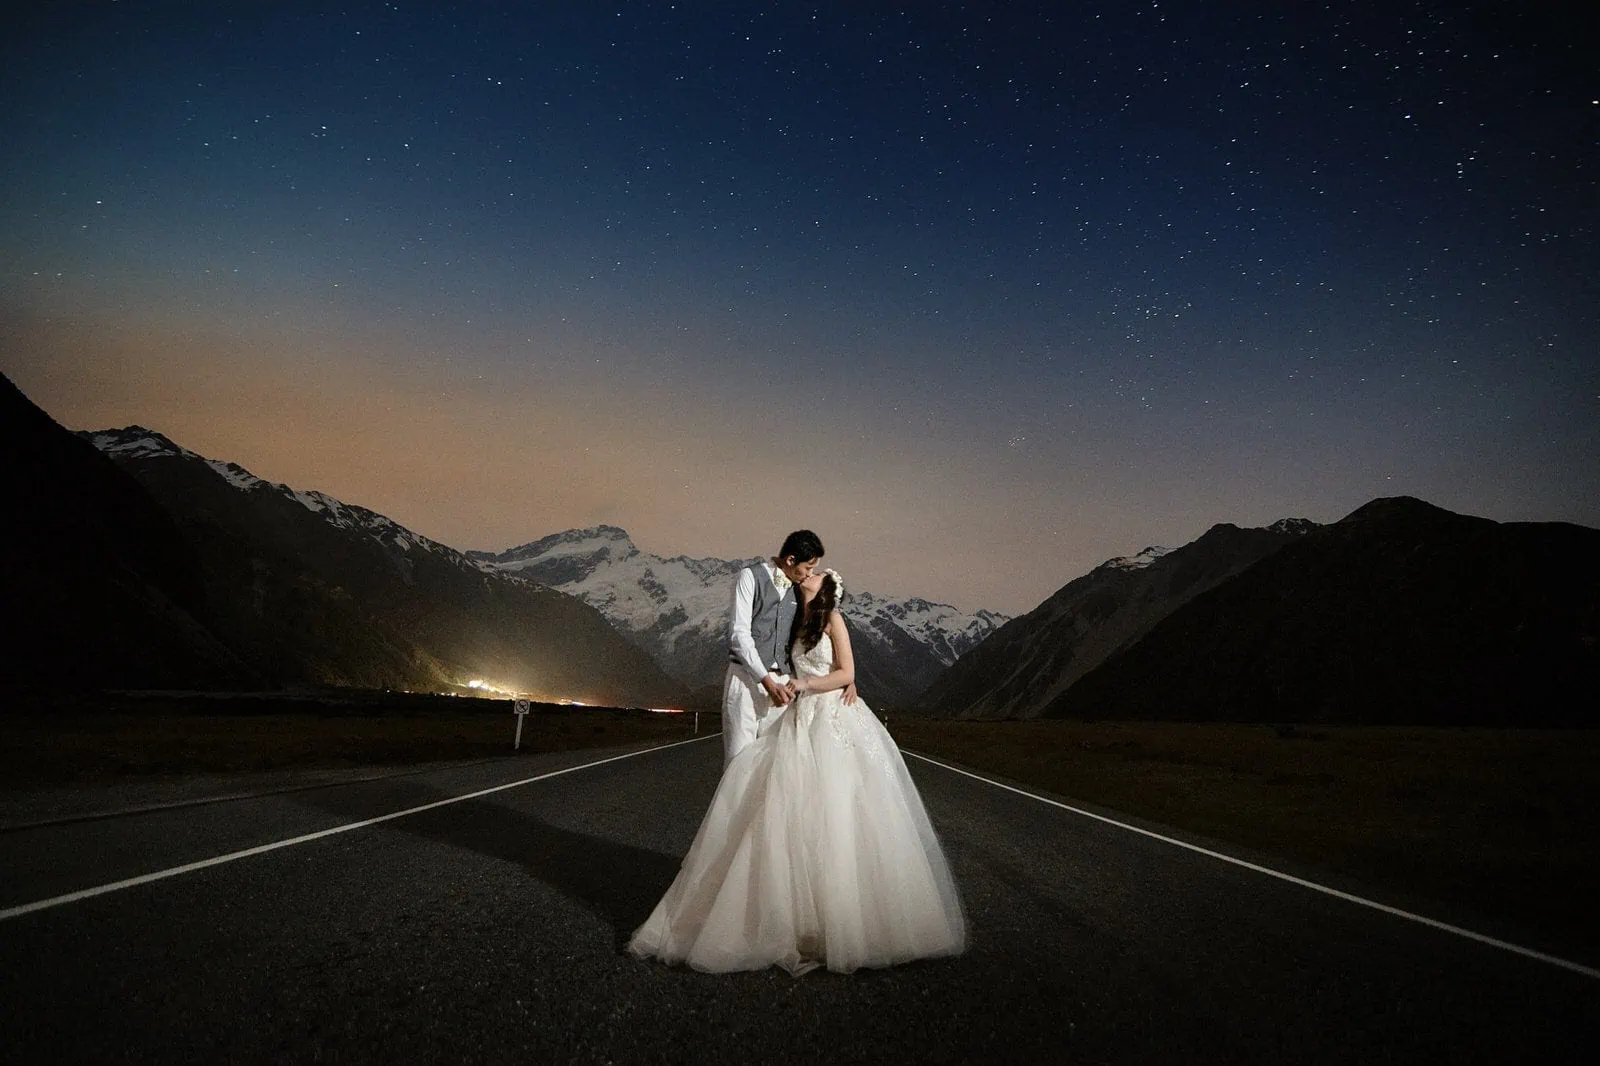 Queenstown New Zealand Elopement Wedding Photographer - A bride and groom standing on a road at night, capturing the ethereal beauty of a starry night.